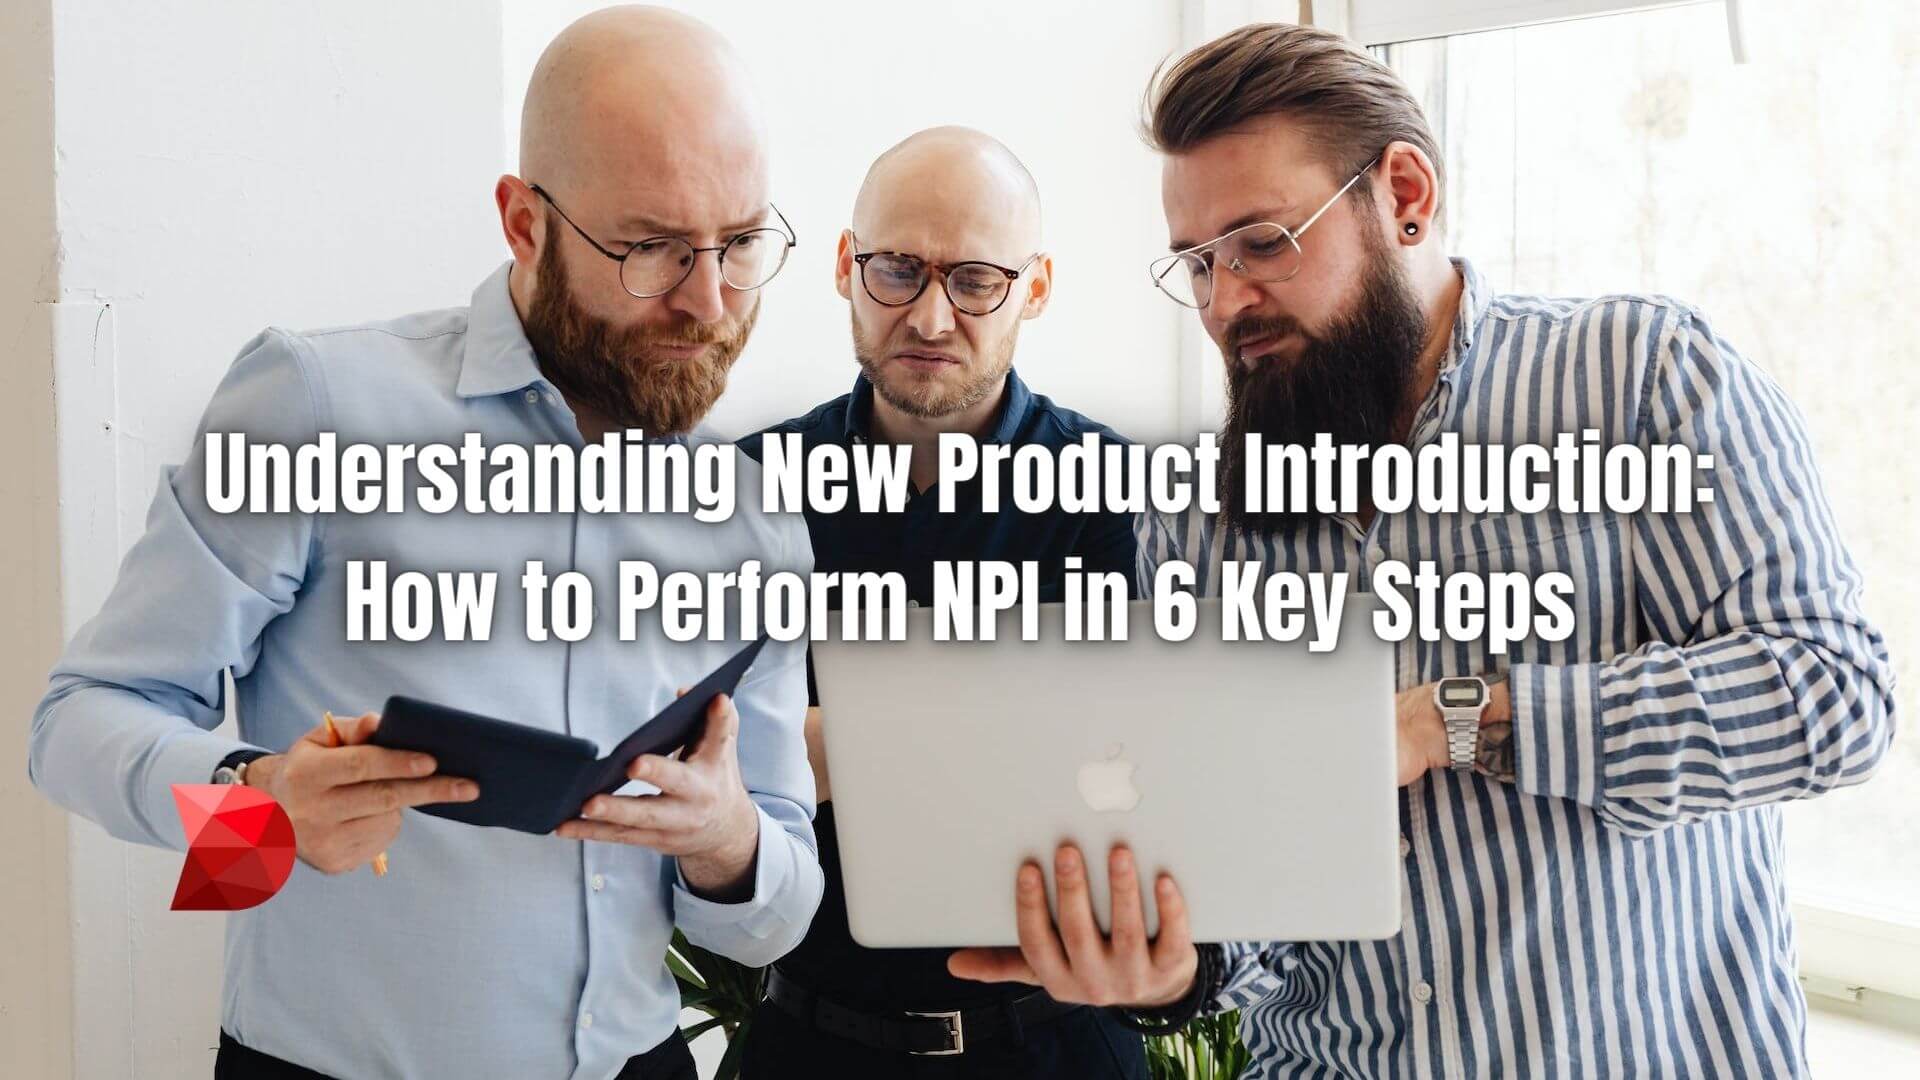 Master the art of New Product Introduction with this guide! Click here to unlock 6 essential steps for successful NPI implementation.